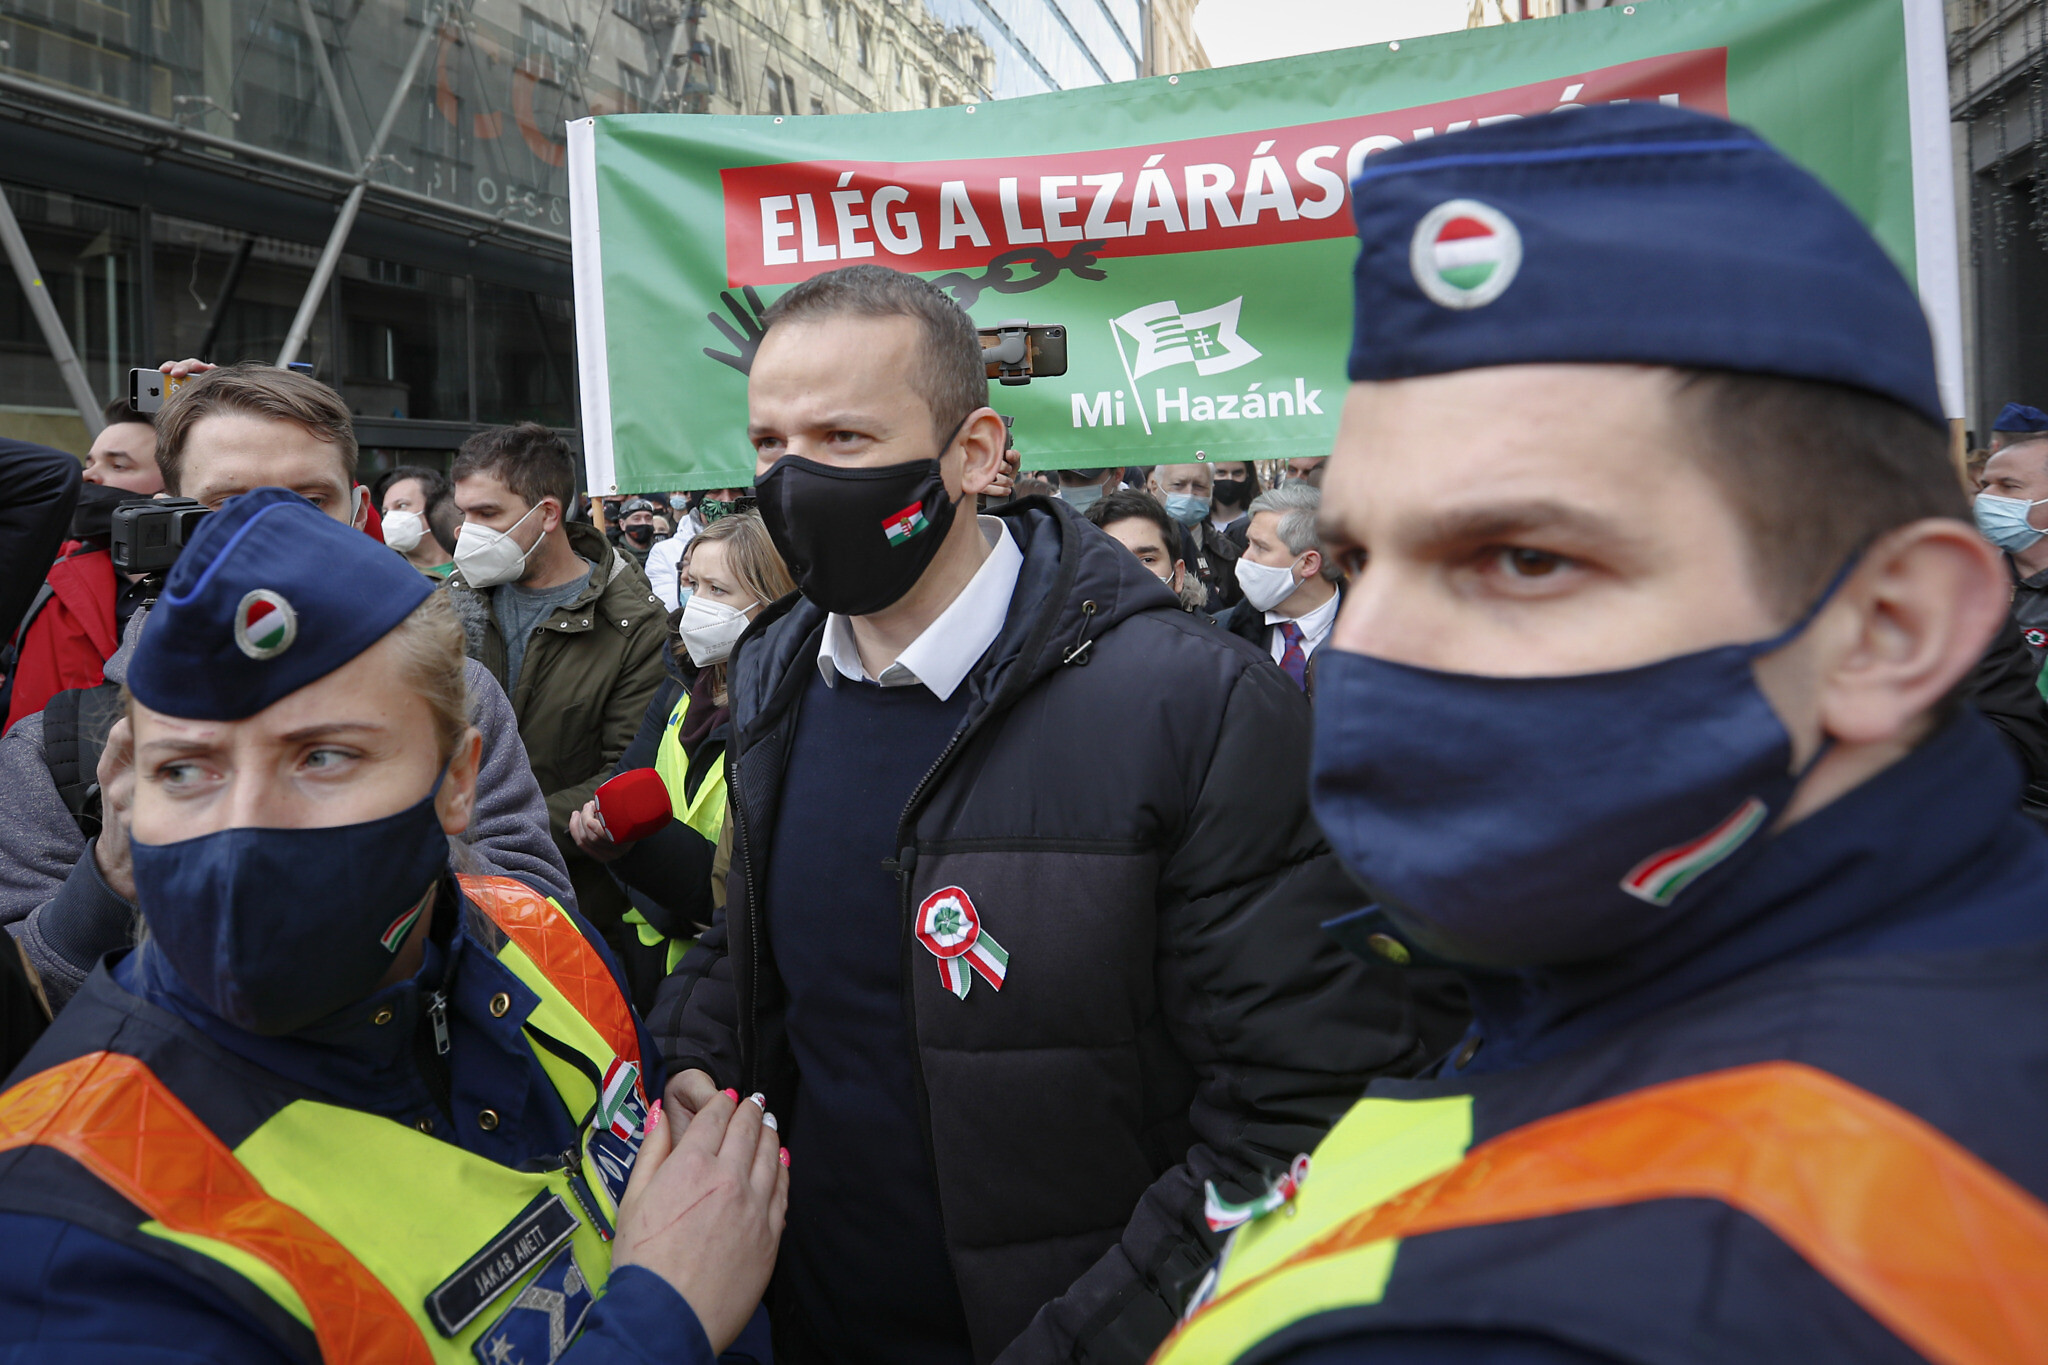 Laszlo Toroczkai, center, head of the Our Homeland Movement, is flanked by police officers during a protest in Budapest, Hungary, Monday, March 15, 2021. (AP Photo/Laszlo Balogh)